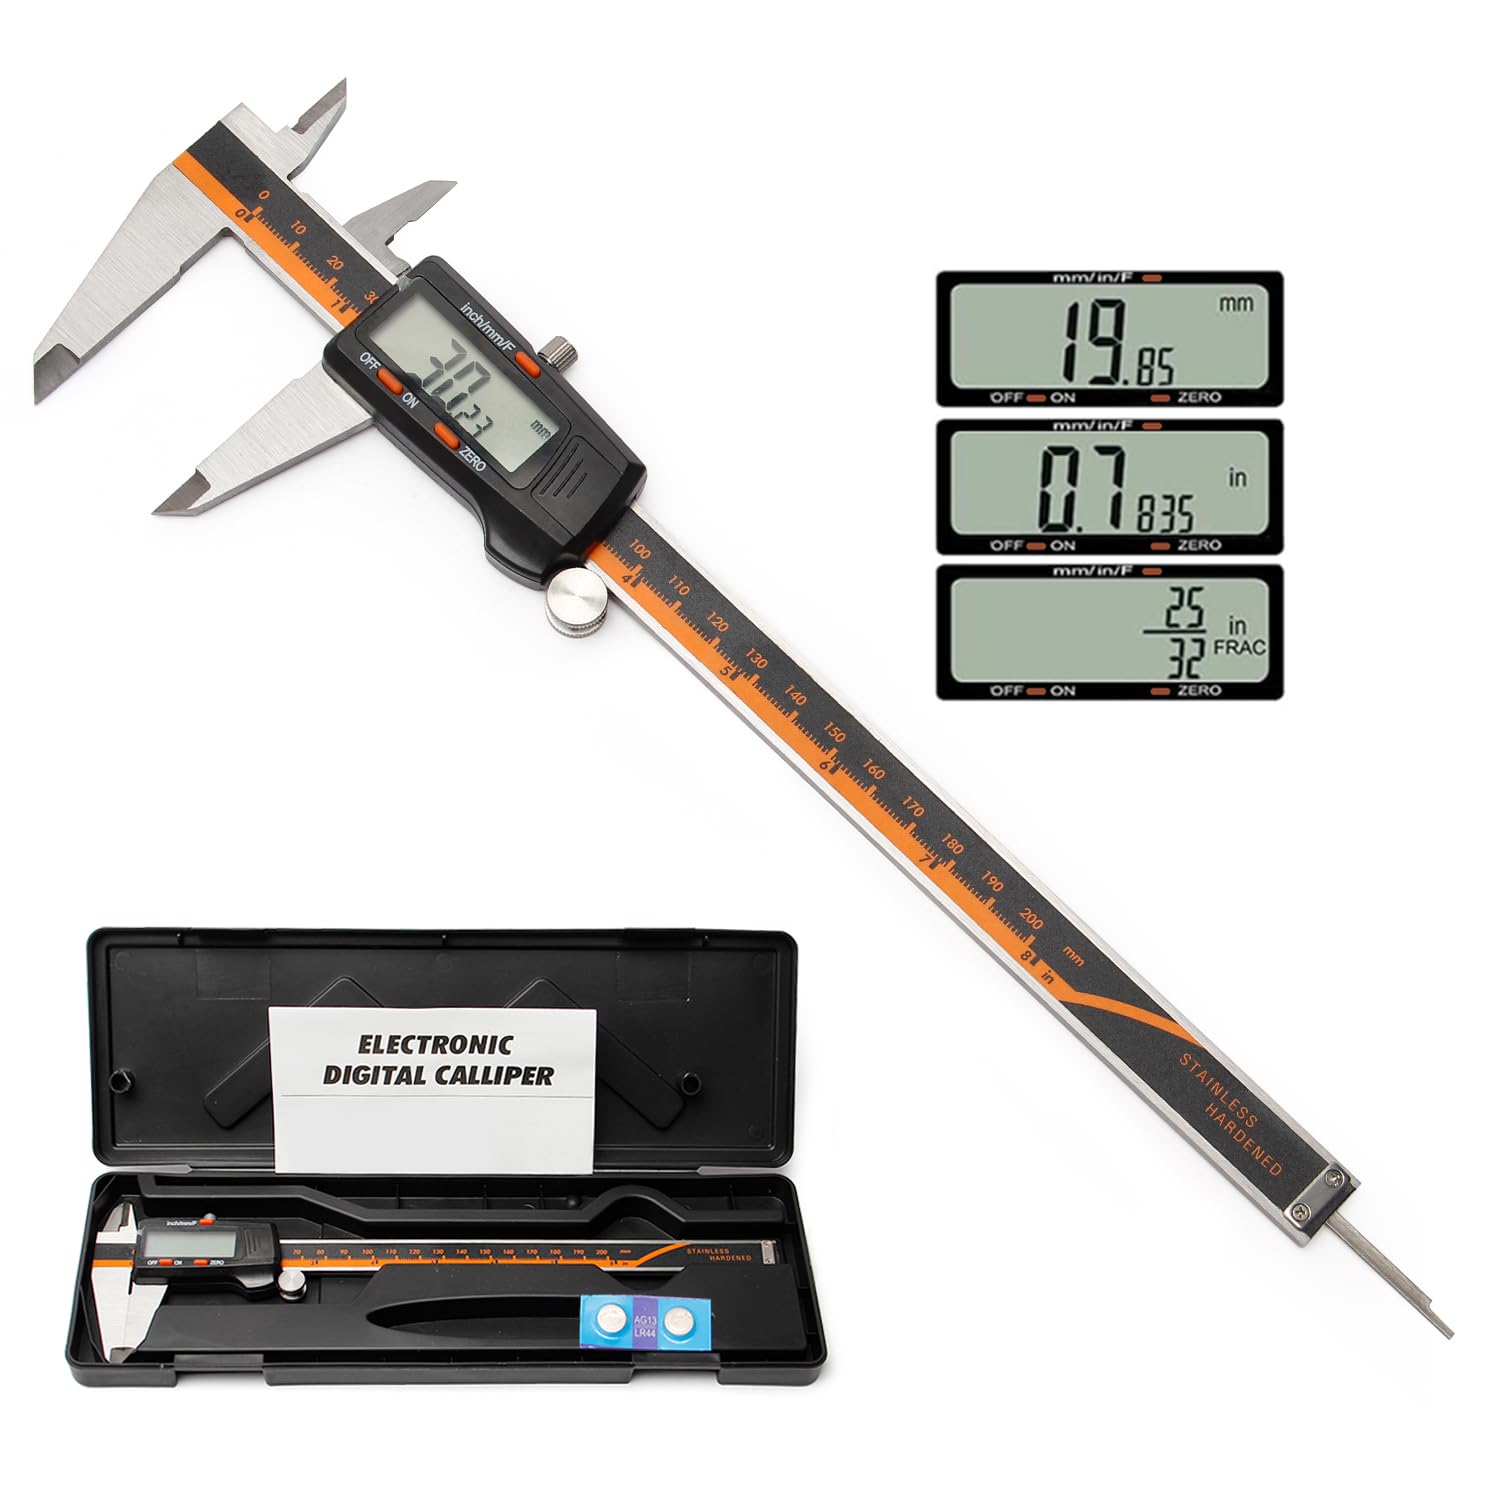 Digital Caliper 8 Inch Micrometer Measuring Tool Electronic Machinist Calibrador Ruler Stainless Steel Metal Vernier Precision Instruments Inch Metric Fraction with Battery